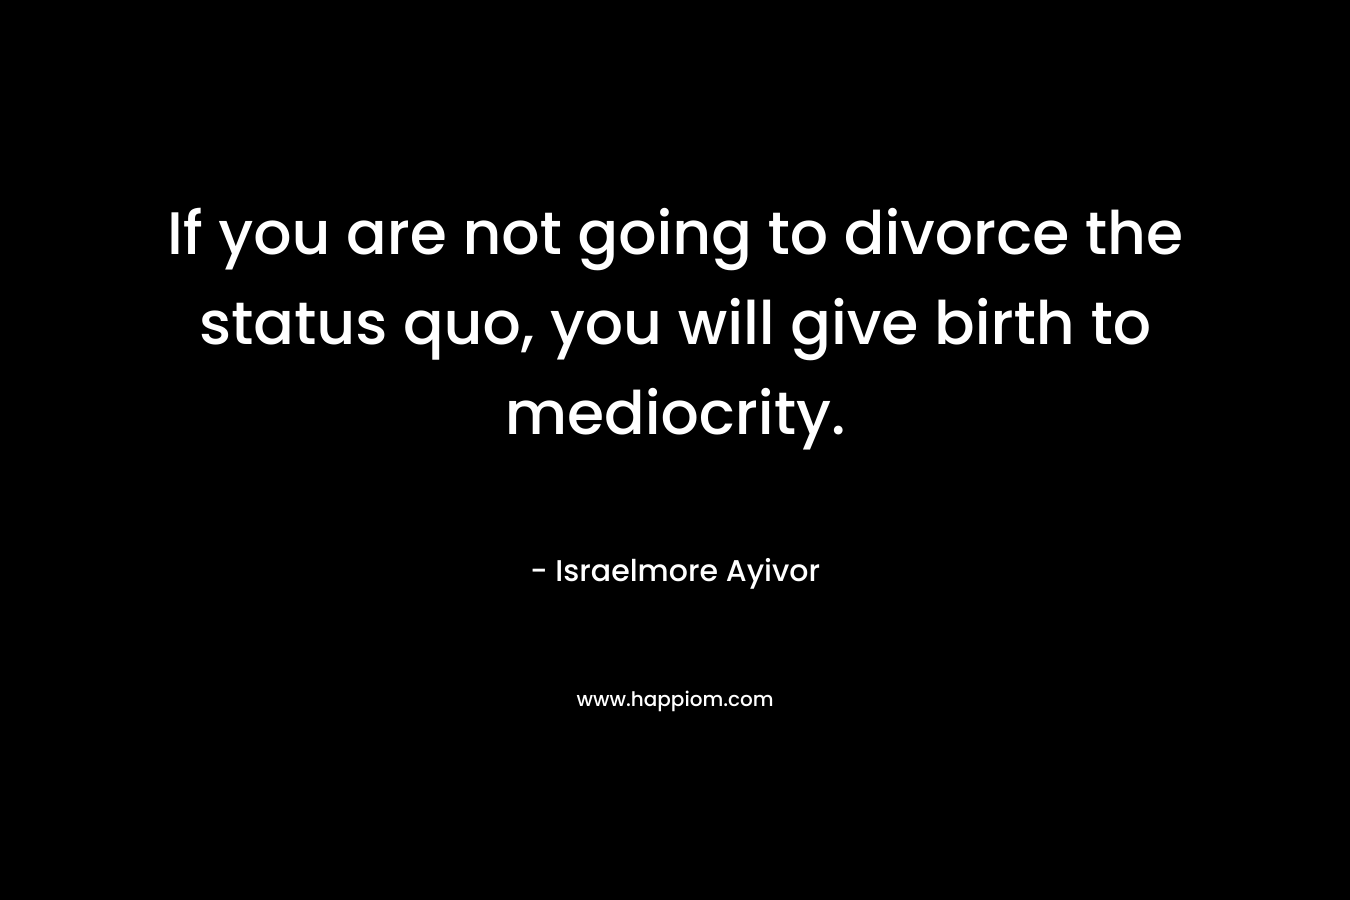 If you are not going to divorce the status quo, you will give birth to mediocrity.